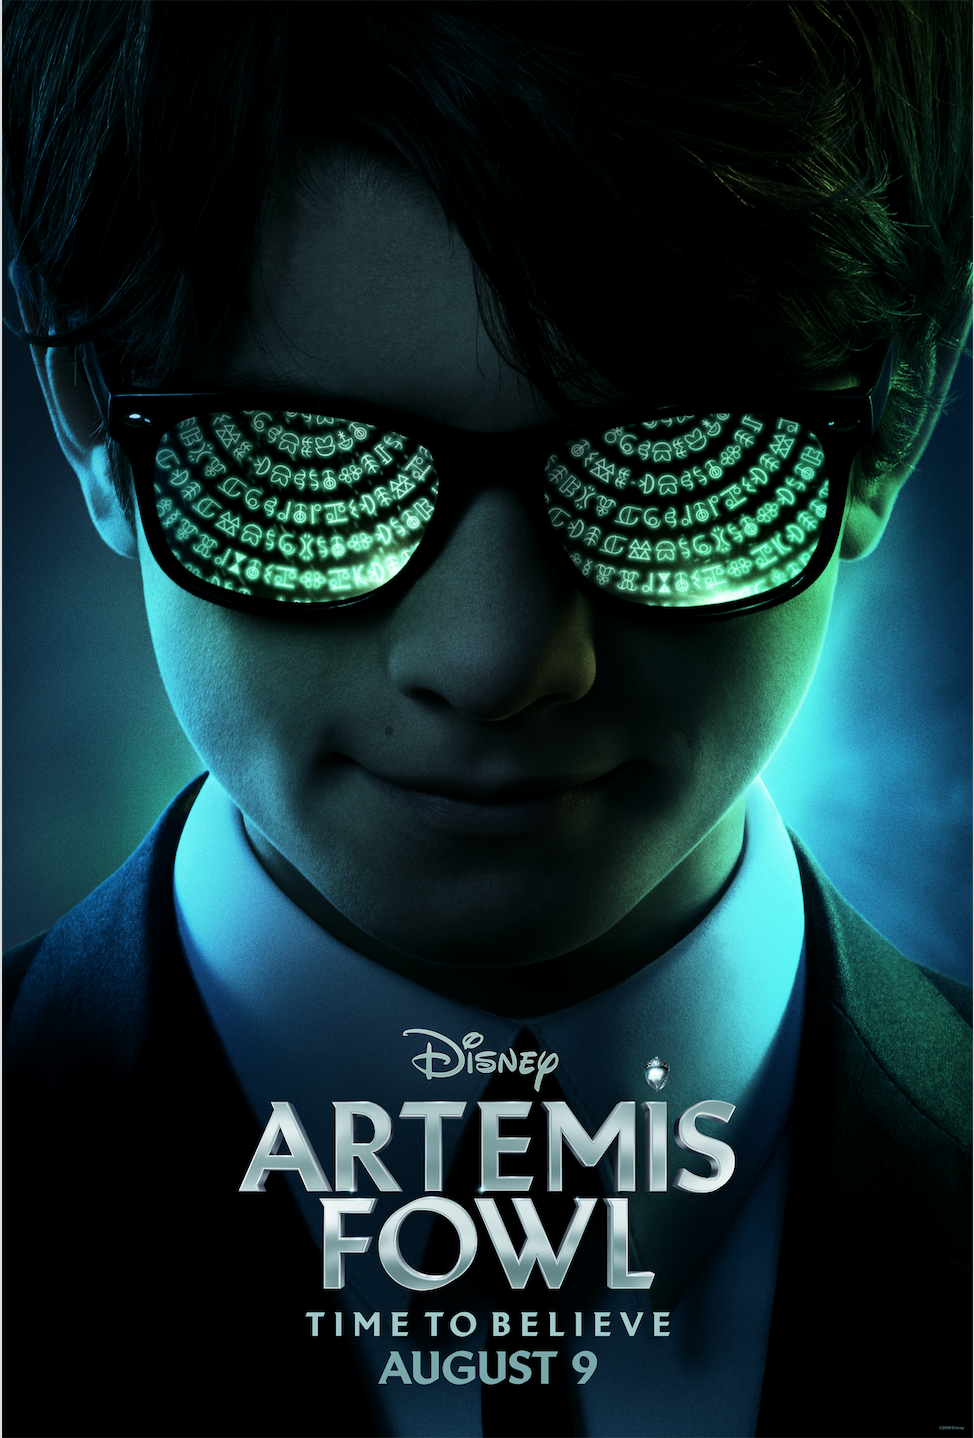 First Look – DISNEY’S “ARTEMIS FOWL” TEASER TRAILER AND POSTER